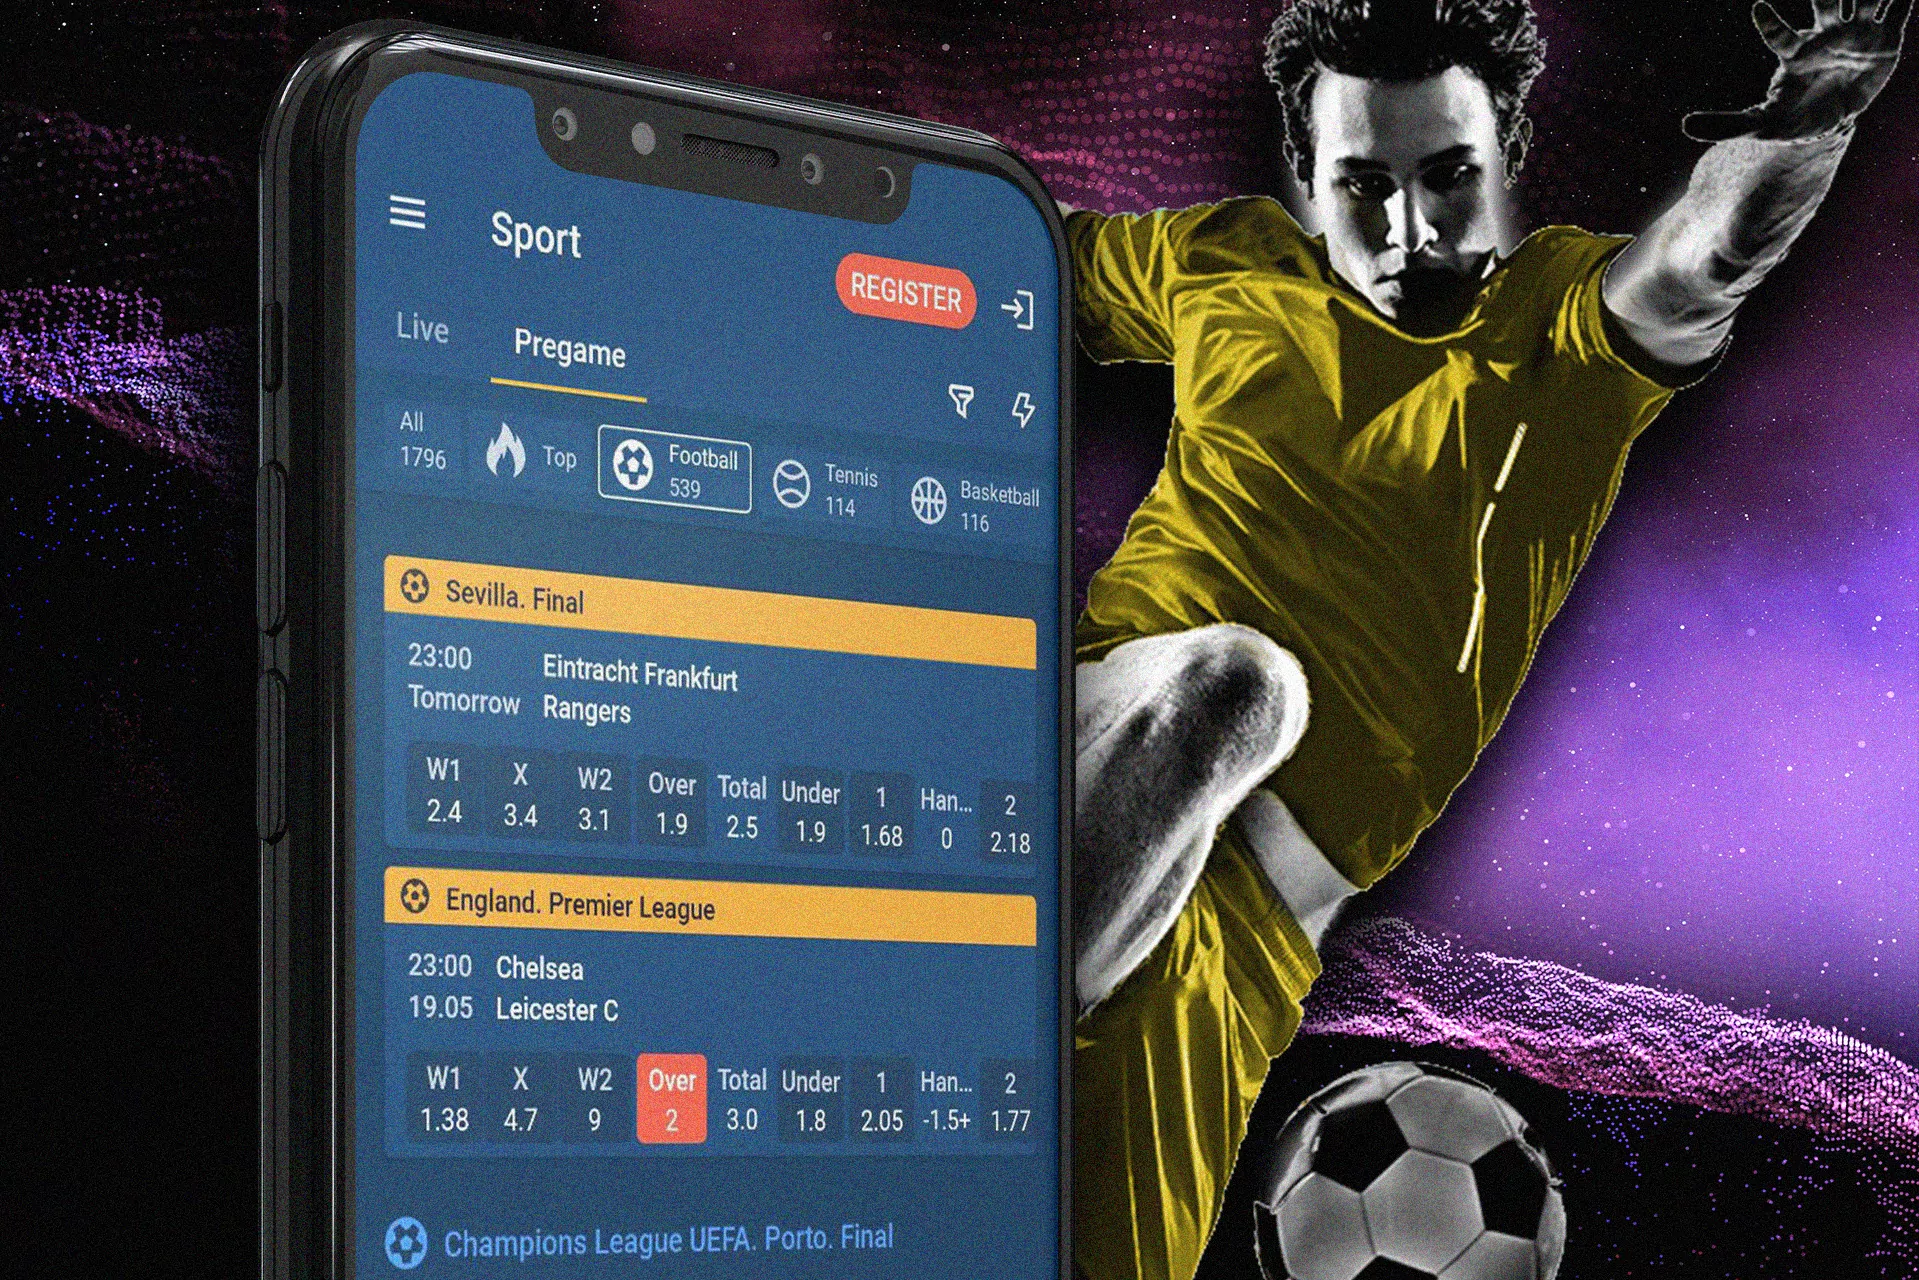 Choose your favorite soccer team and bet on it in the Mostbet app.